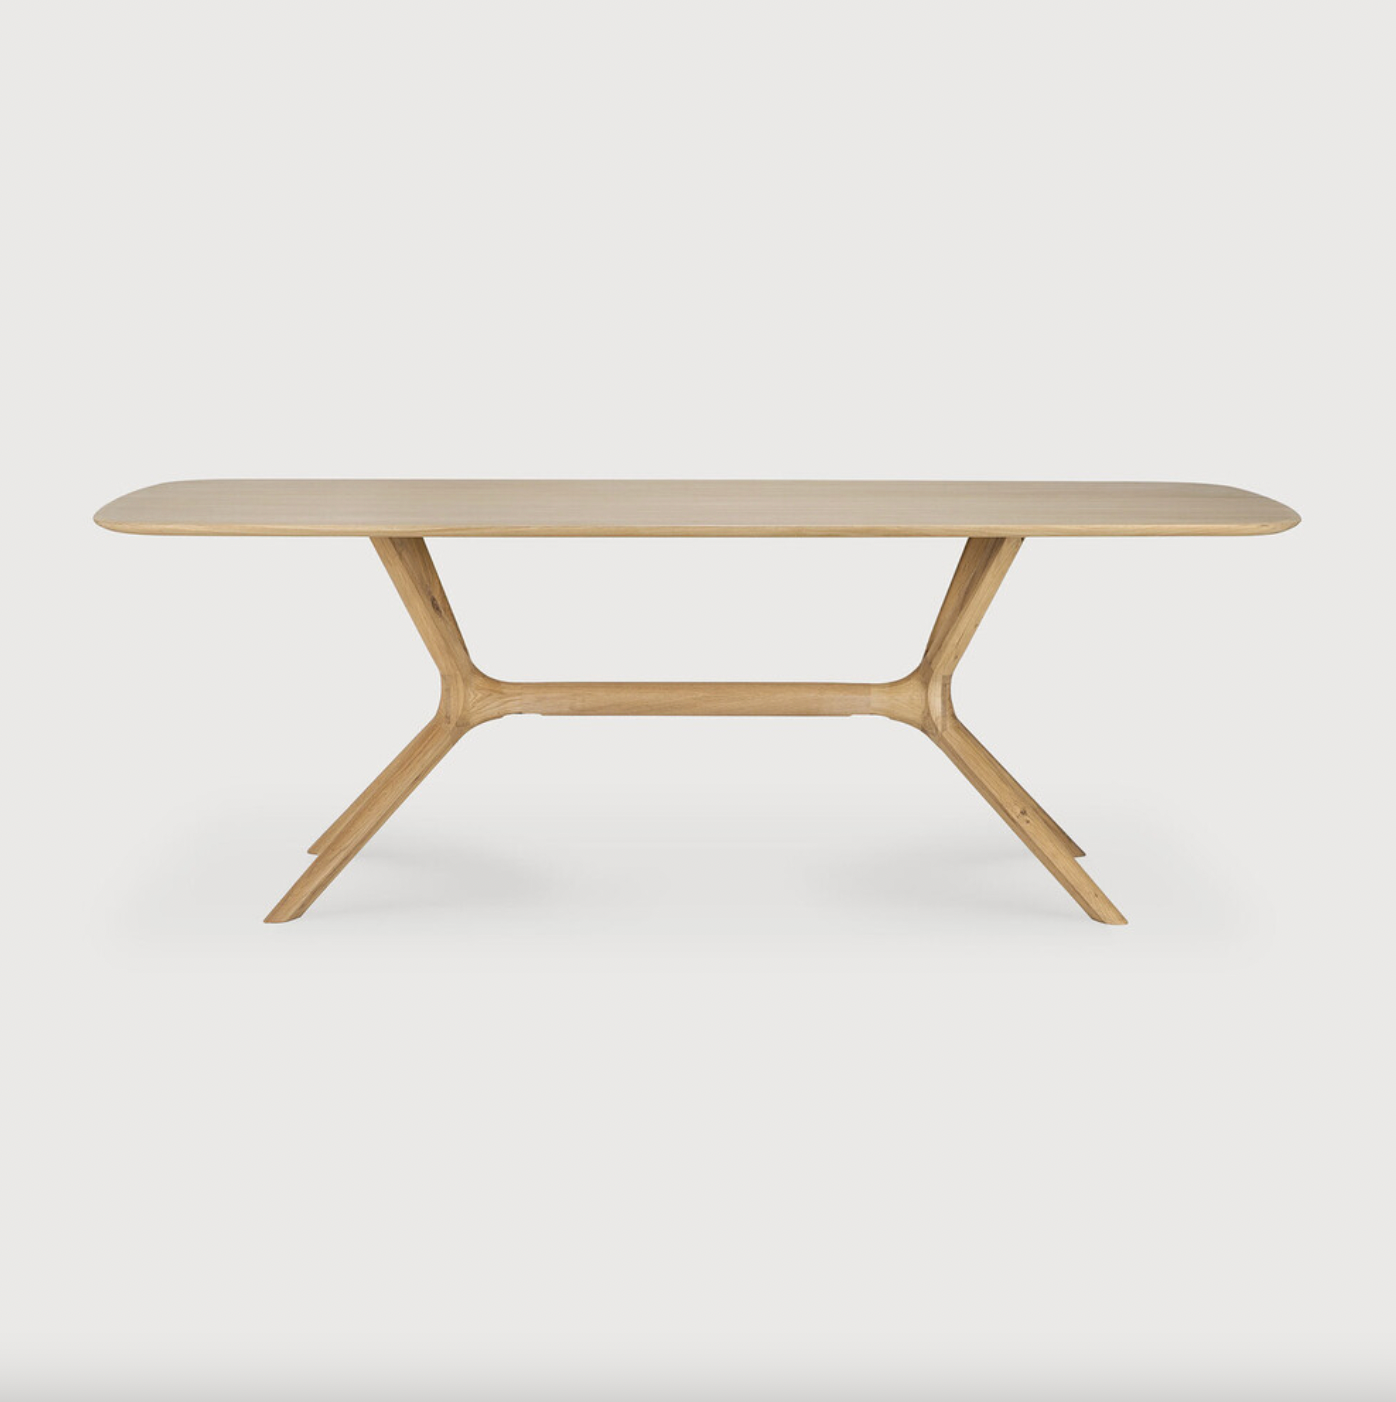 This Oak X Dining Table features sturdy, intricate construction of advance wood working. With a seamless structural interplay between the unique shape of the legs and the soft lines of the tabletop, guests will enjoy the most comfortable seating experience.  Designed by Alain van Havre Finish: Oiled